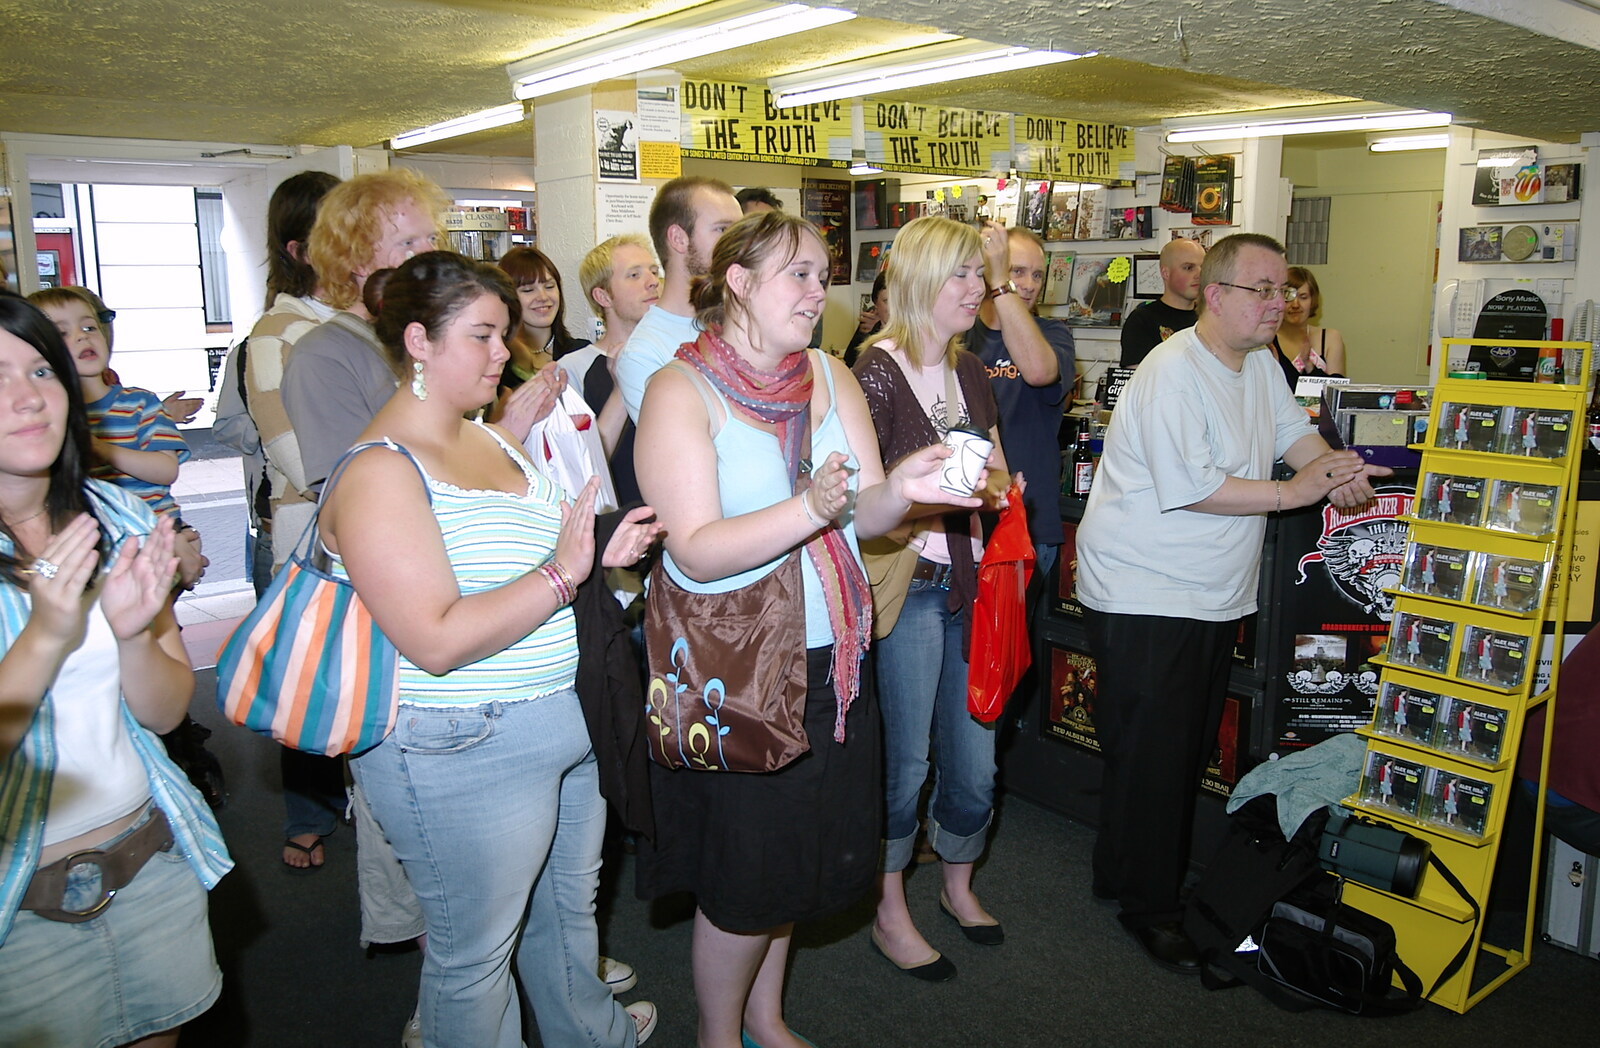 An appreciative crowd in Revs from Richard Panton's Van and Alex Hill at Revolution Records, Diss and Cambridge - 29th July 2005